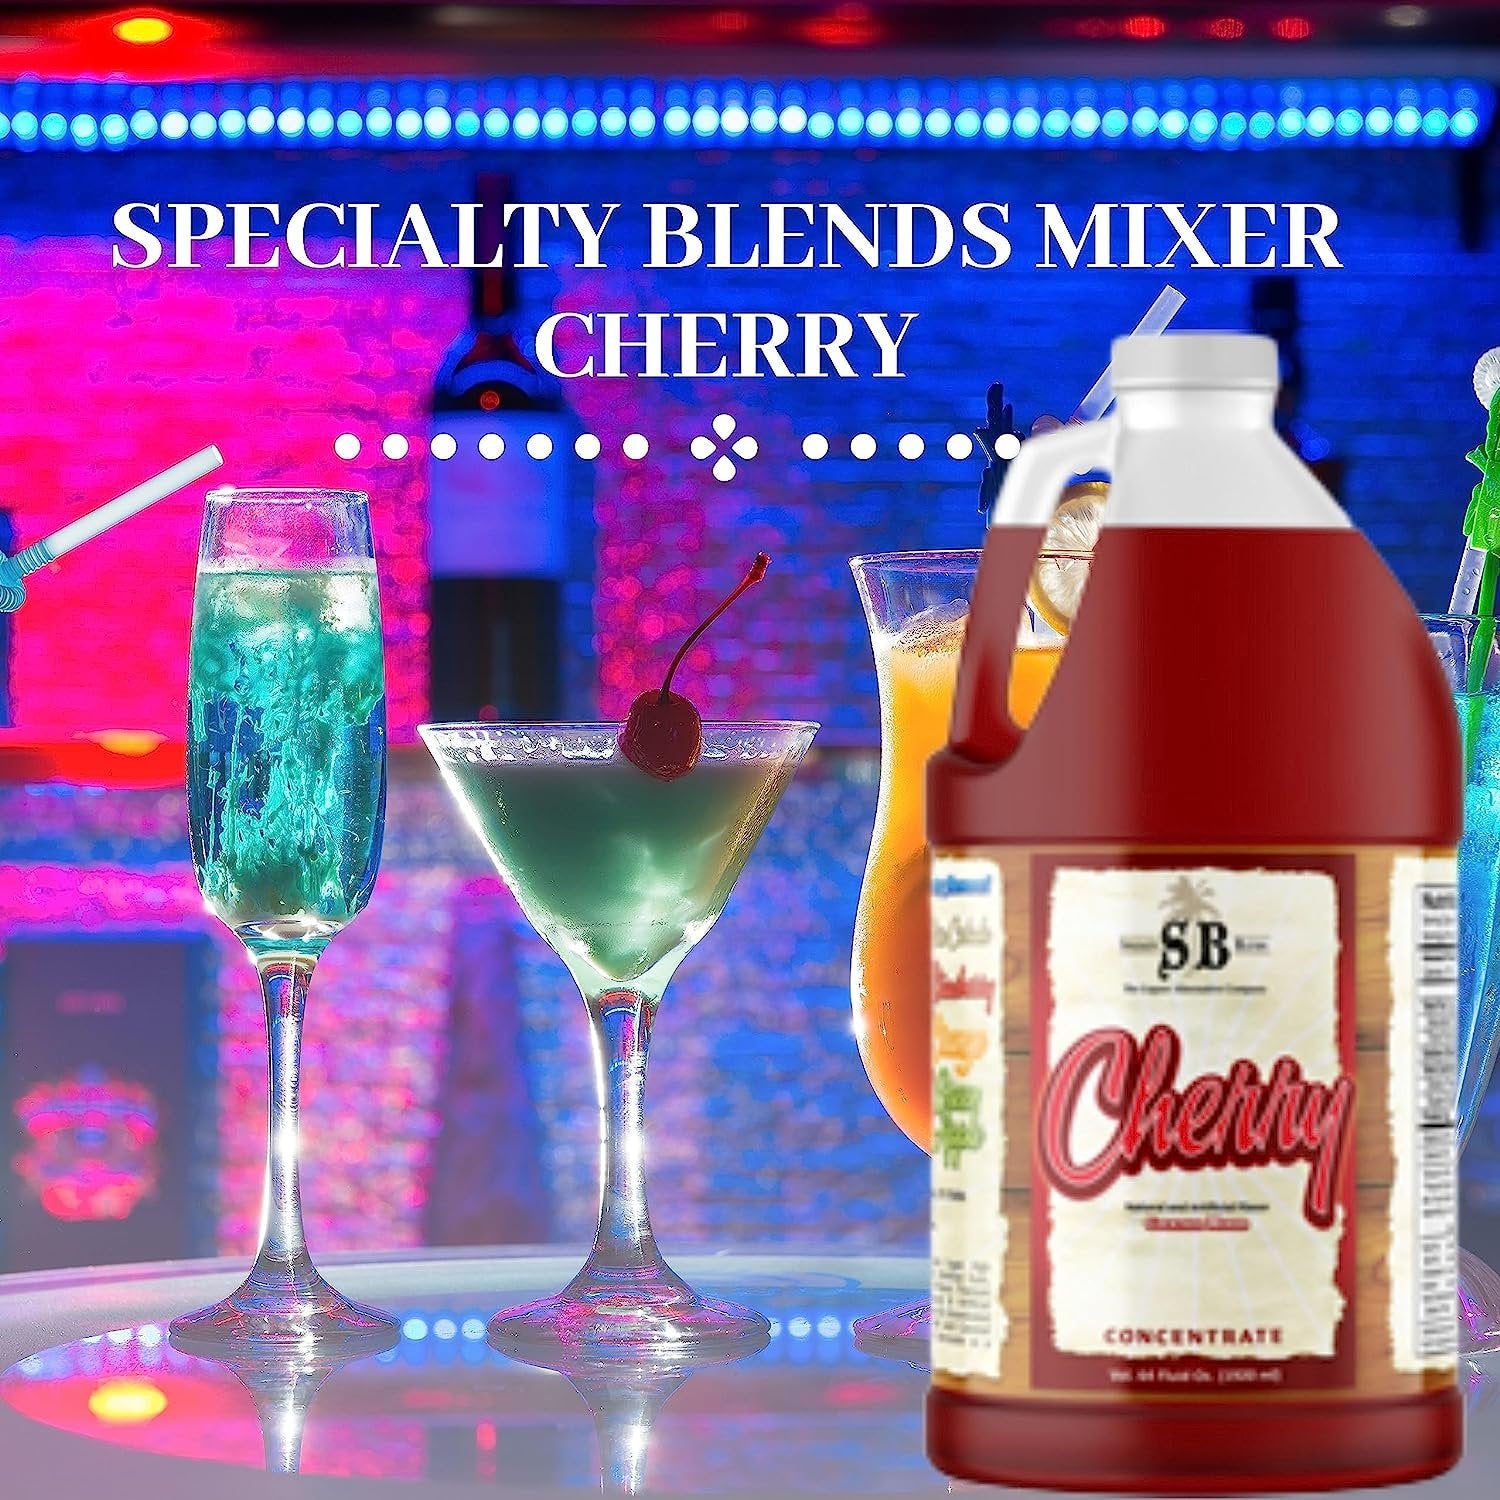 Specialty Blends Cherry Flavored Syrup Cocktail Mixer Concentrate, Made with Organic Cherry Flavor Syrups For Drinks, 1/2 Gallon (Pack of 1) - with Bonus Worldwide Nutrition Multi Purpose Key Chain